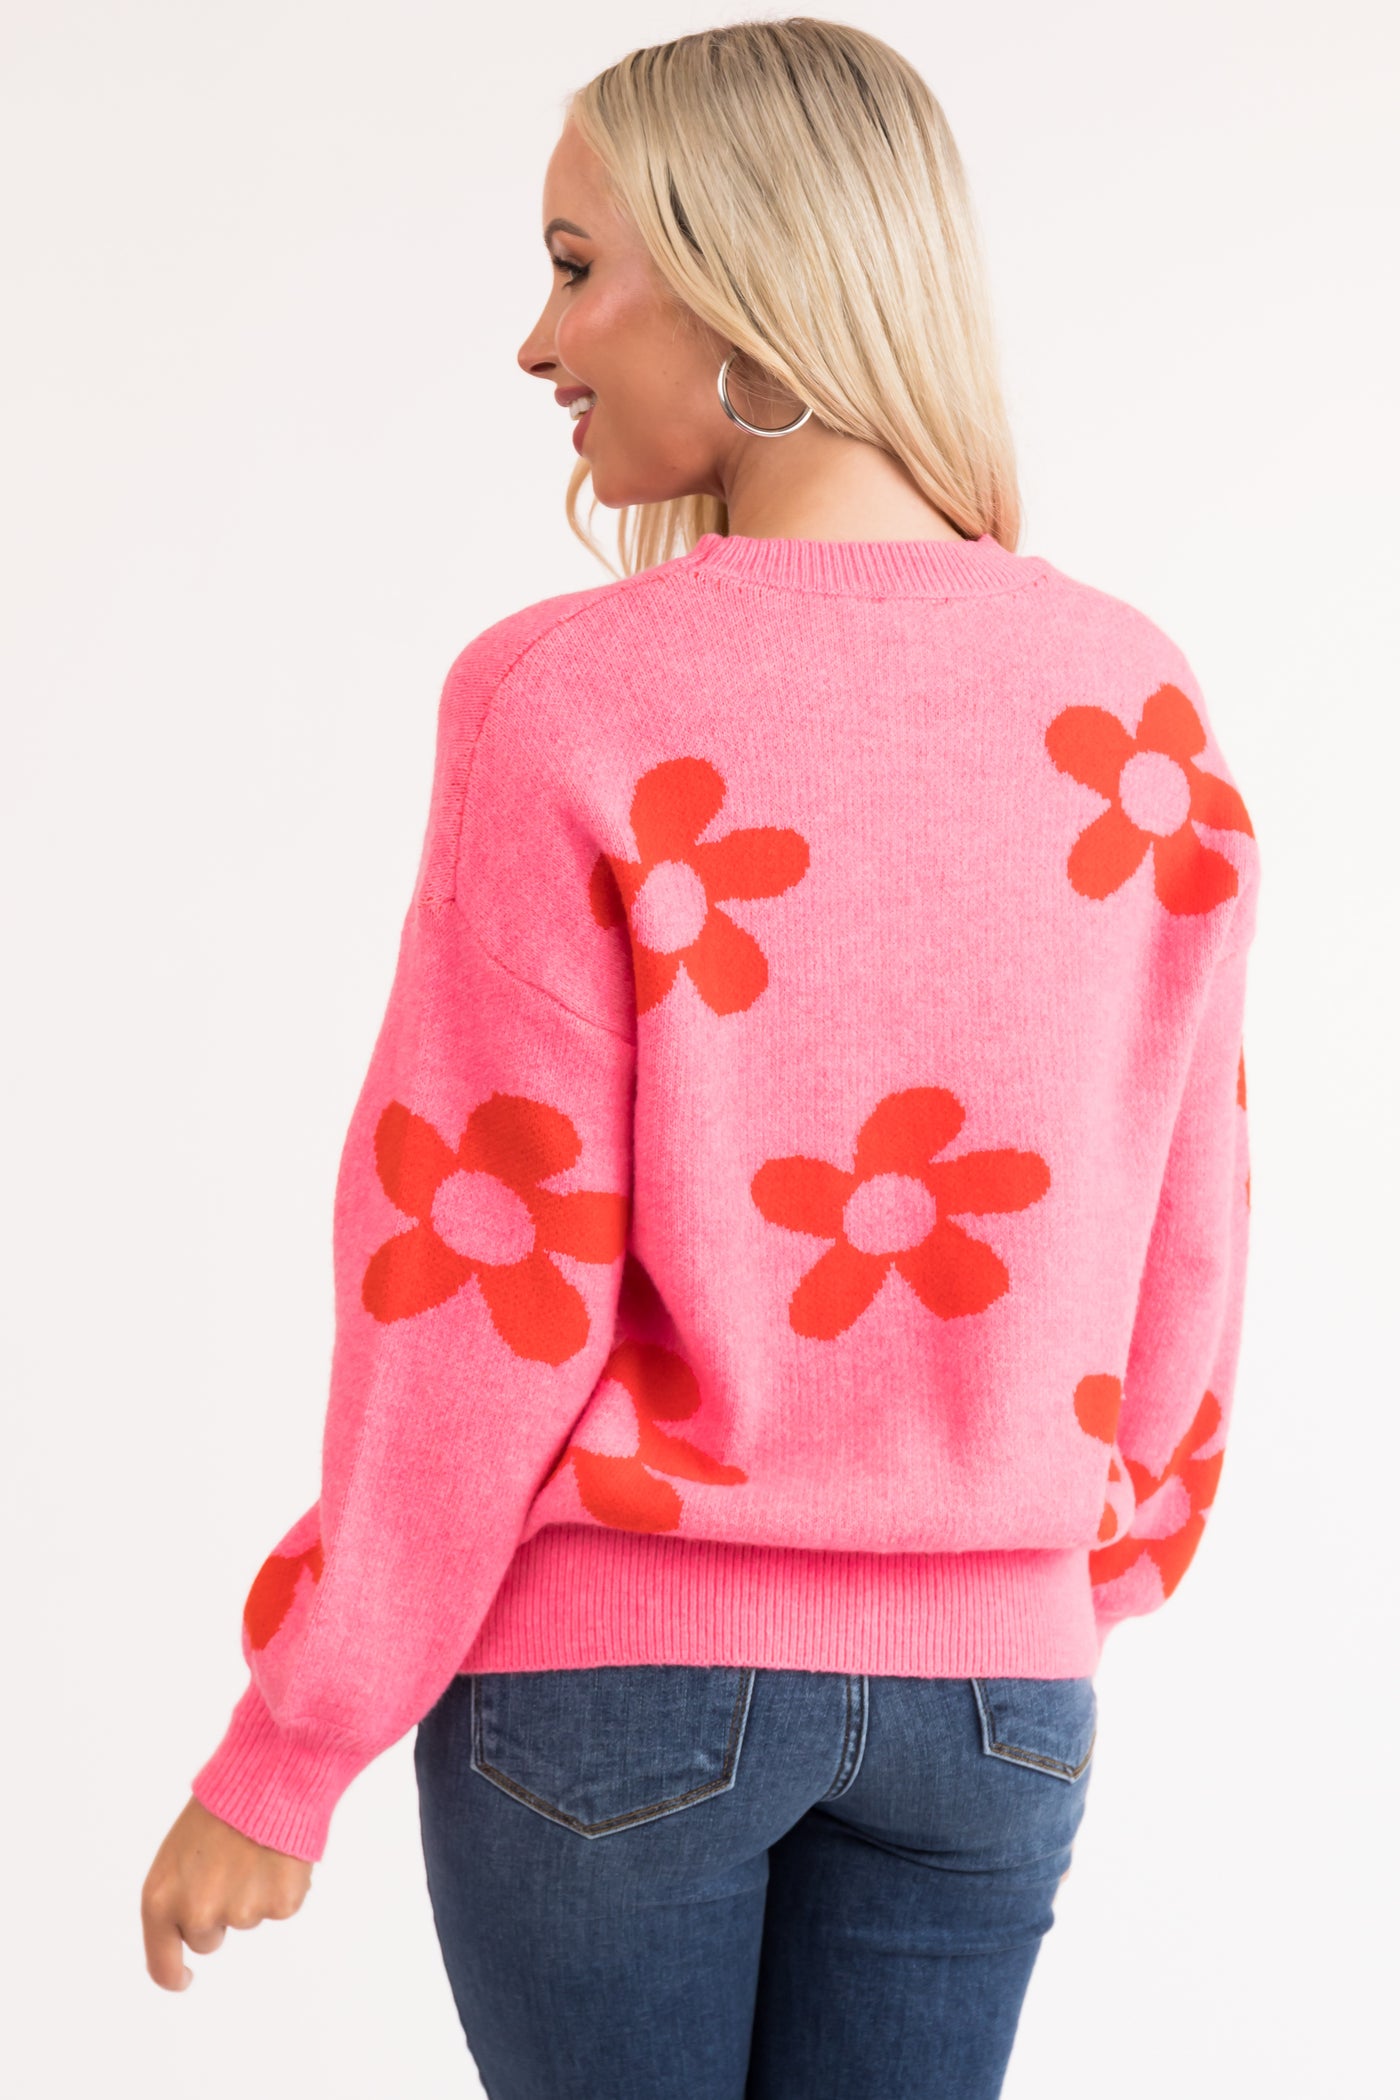 Hot Pink and Fire Floral Print Knit Sweater